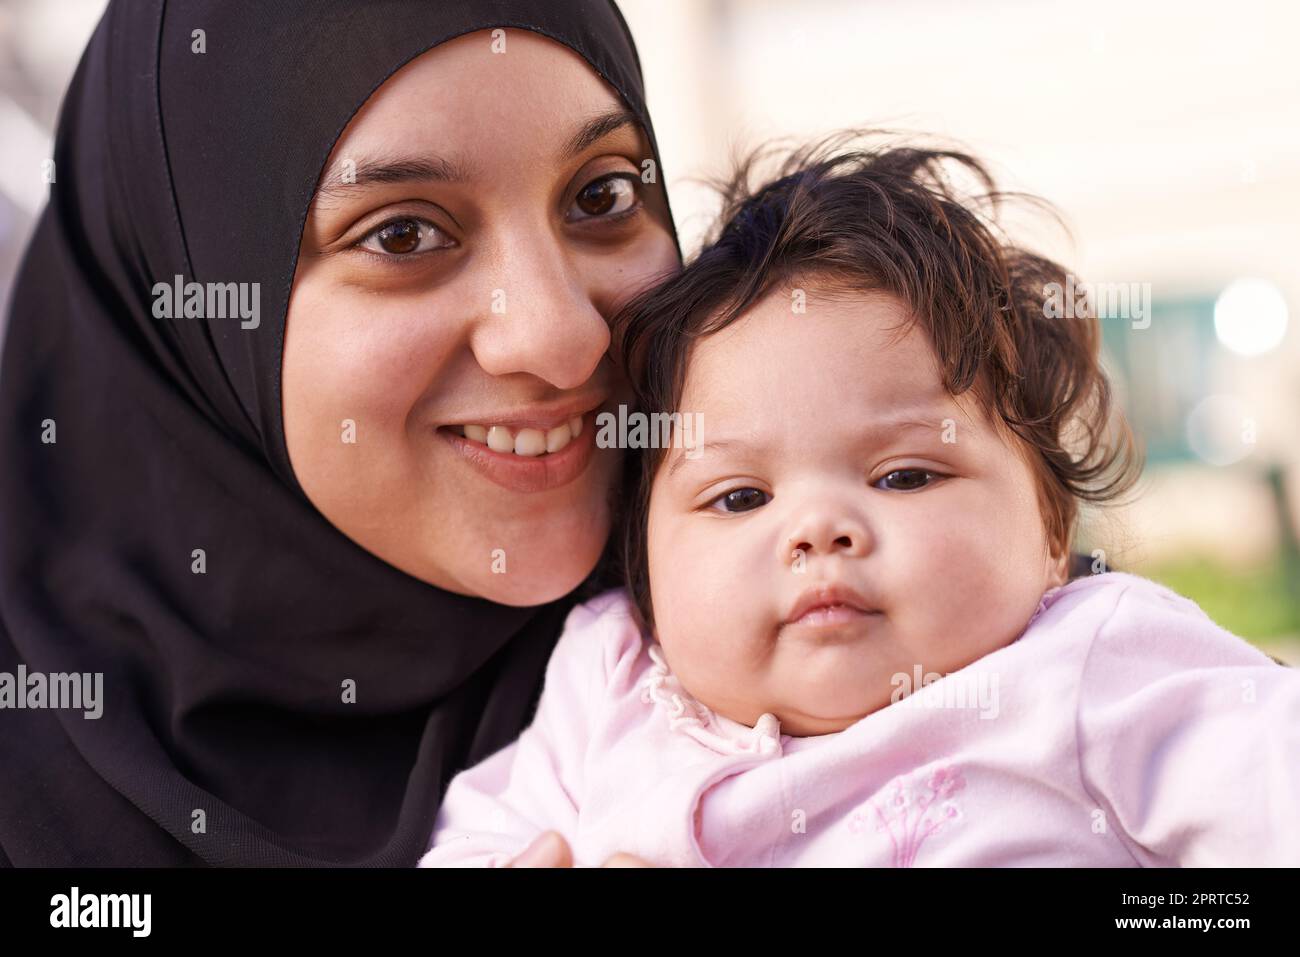 Moms little love. a muslim mother and her little baby girl. Stock Photo